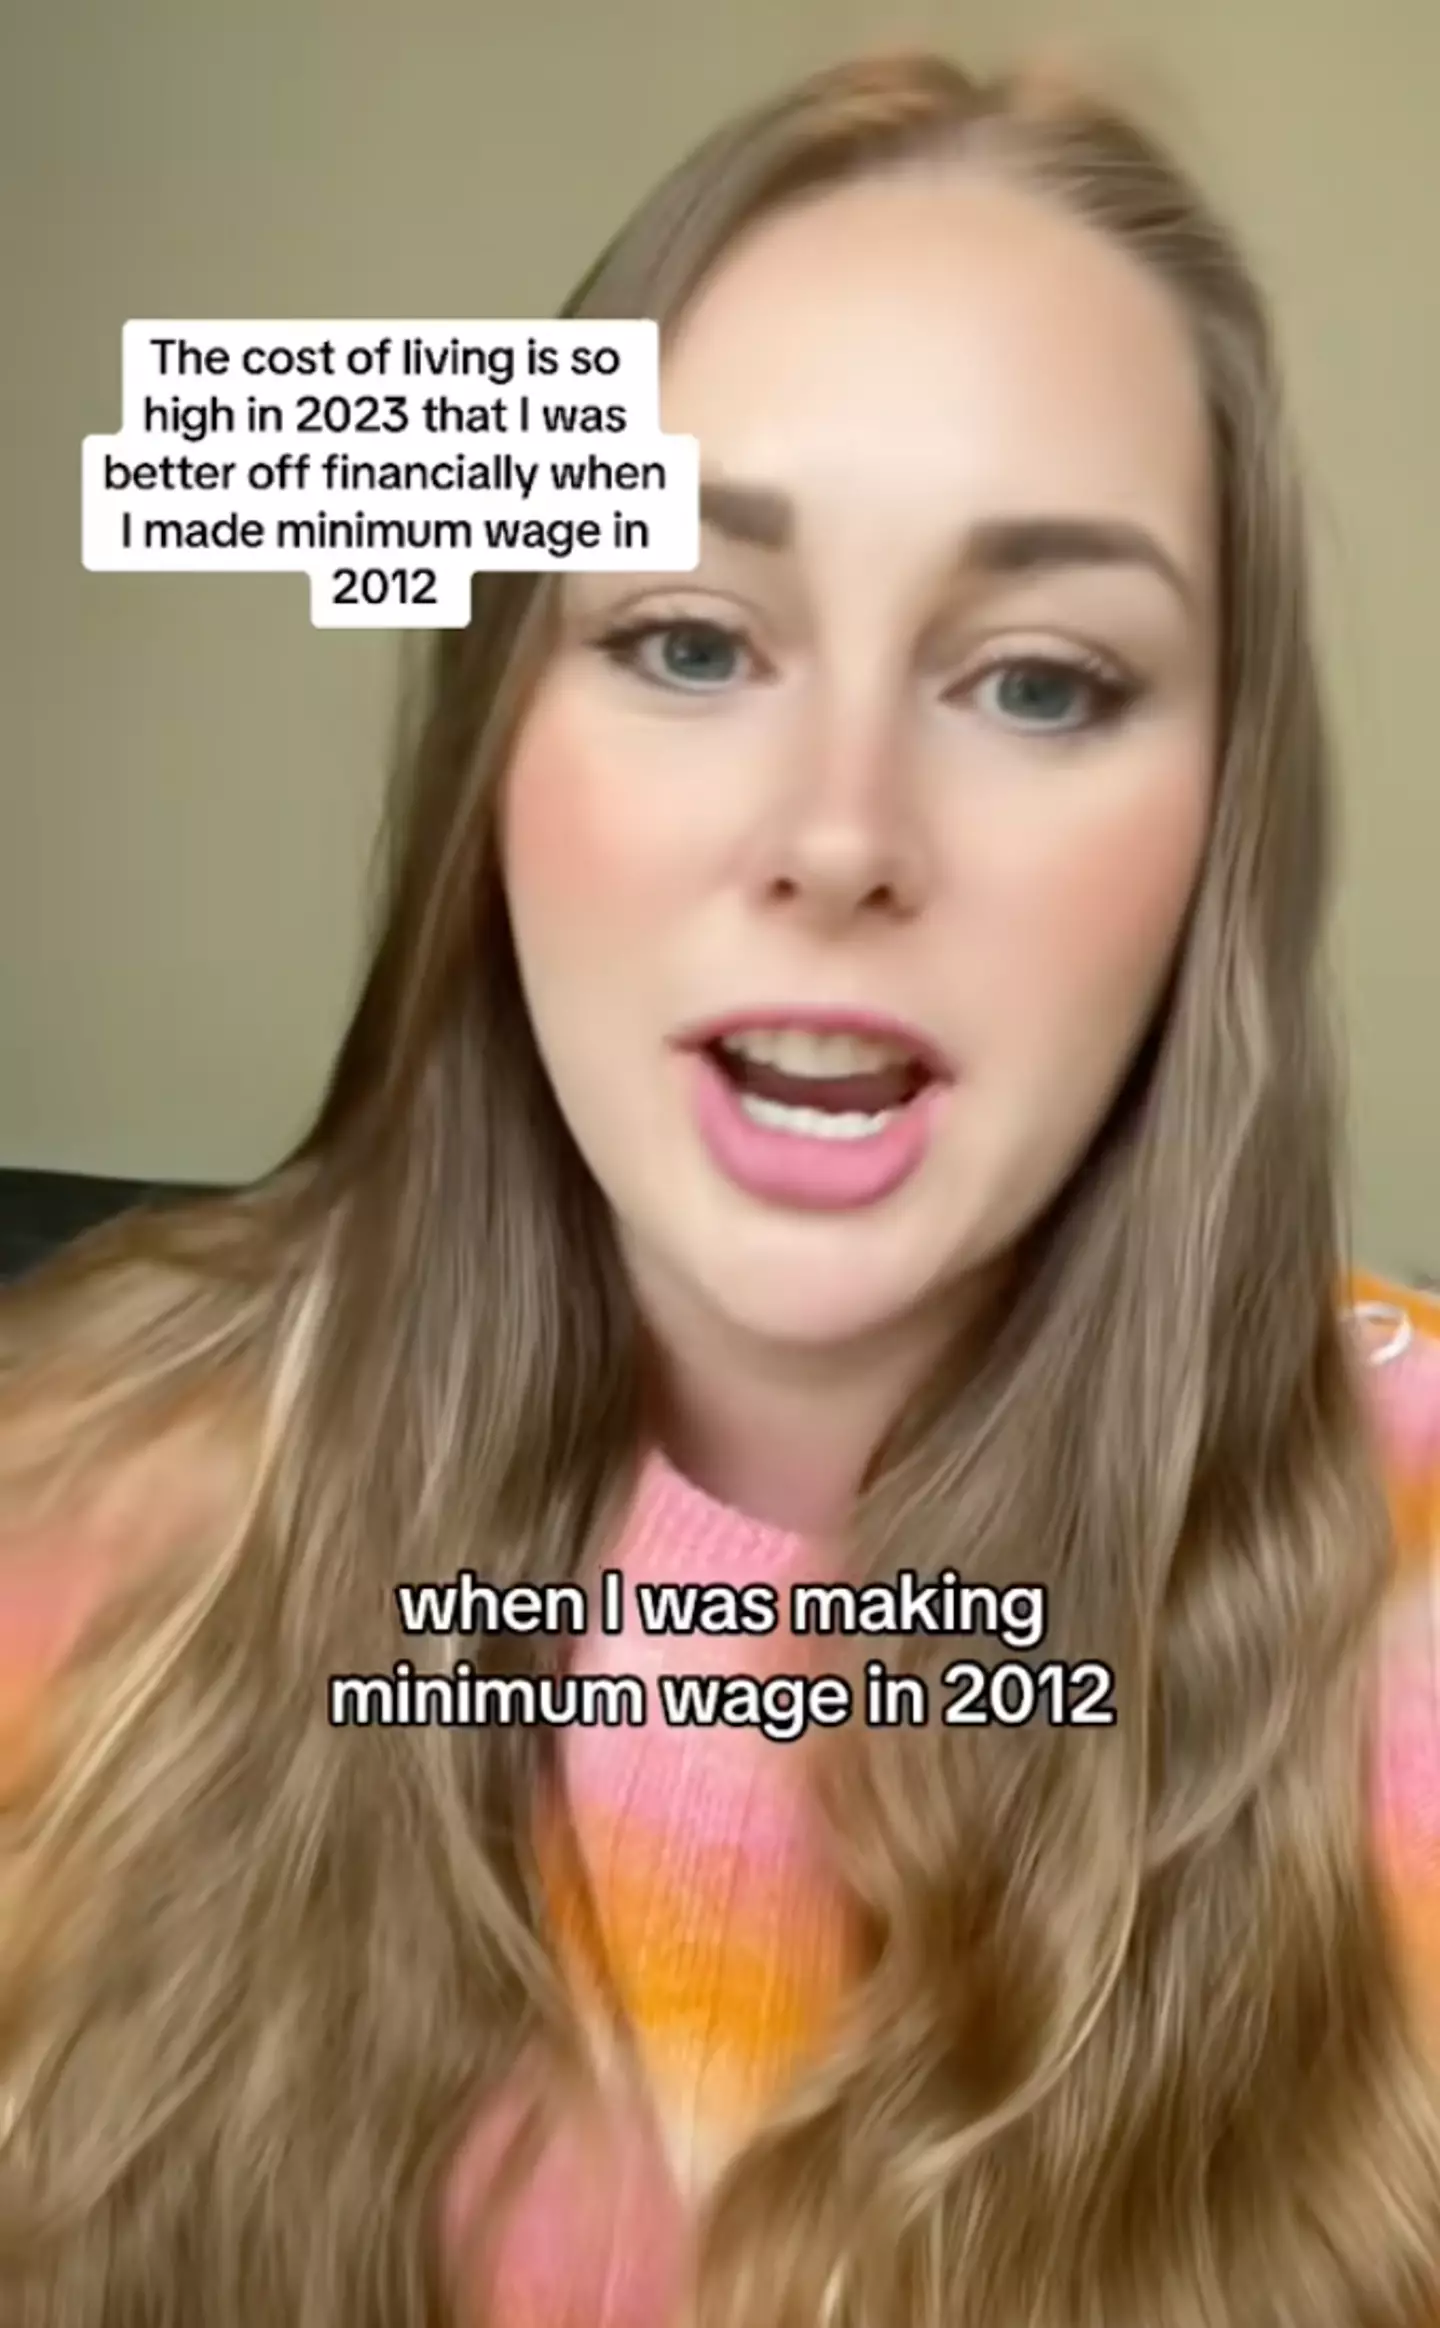 Sam said she feels she was better off in 2012 on minimum wage.